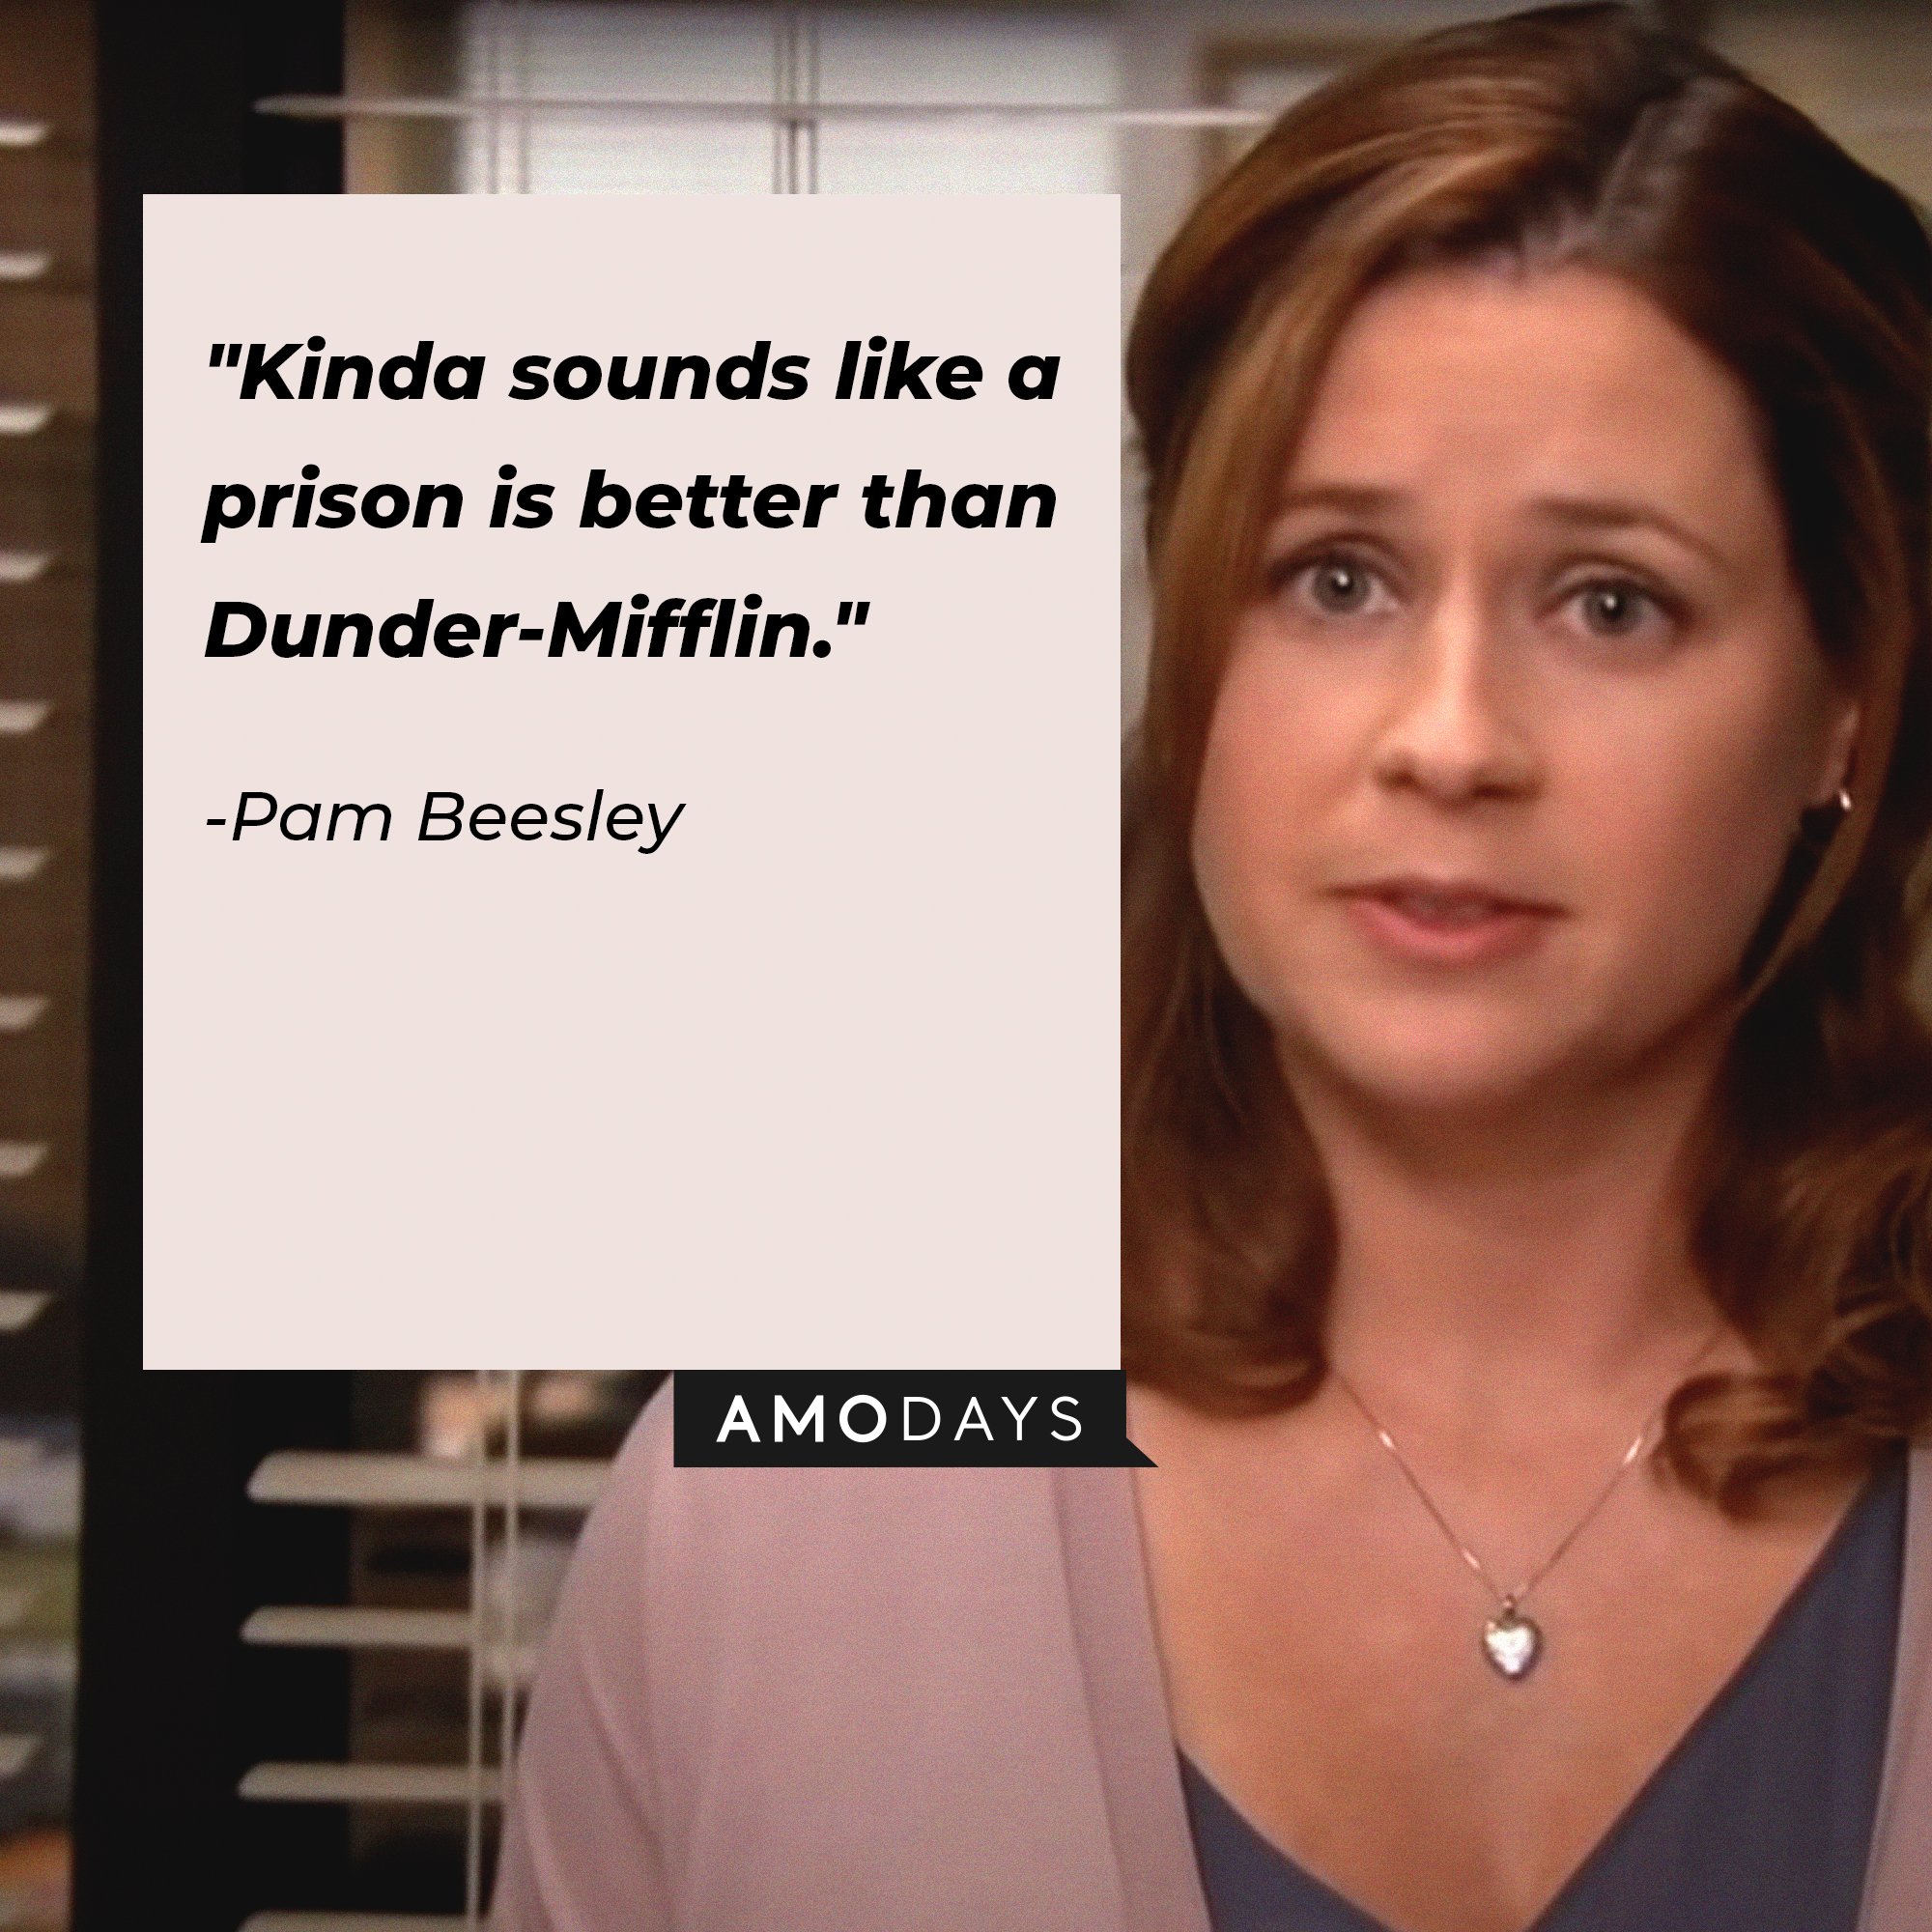 Pam Beesley’s quote: "Kinda sounds like a prison is better than Dunder-Mifflin."  | Image: AmoDays